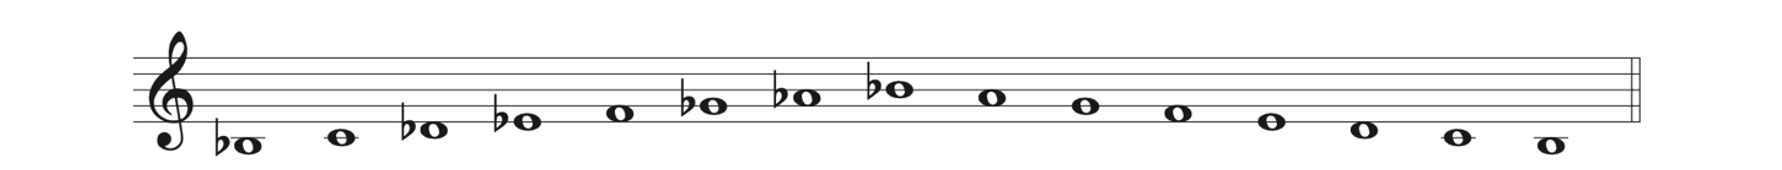 B-flat natural minor scale with added D-flat, E-flat, G-flat, and A-flat.